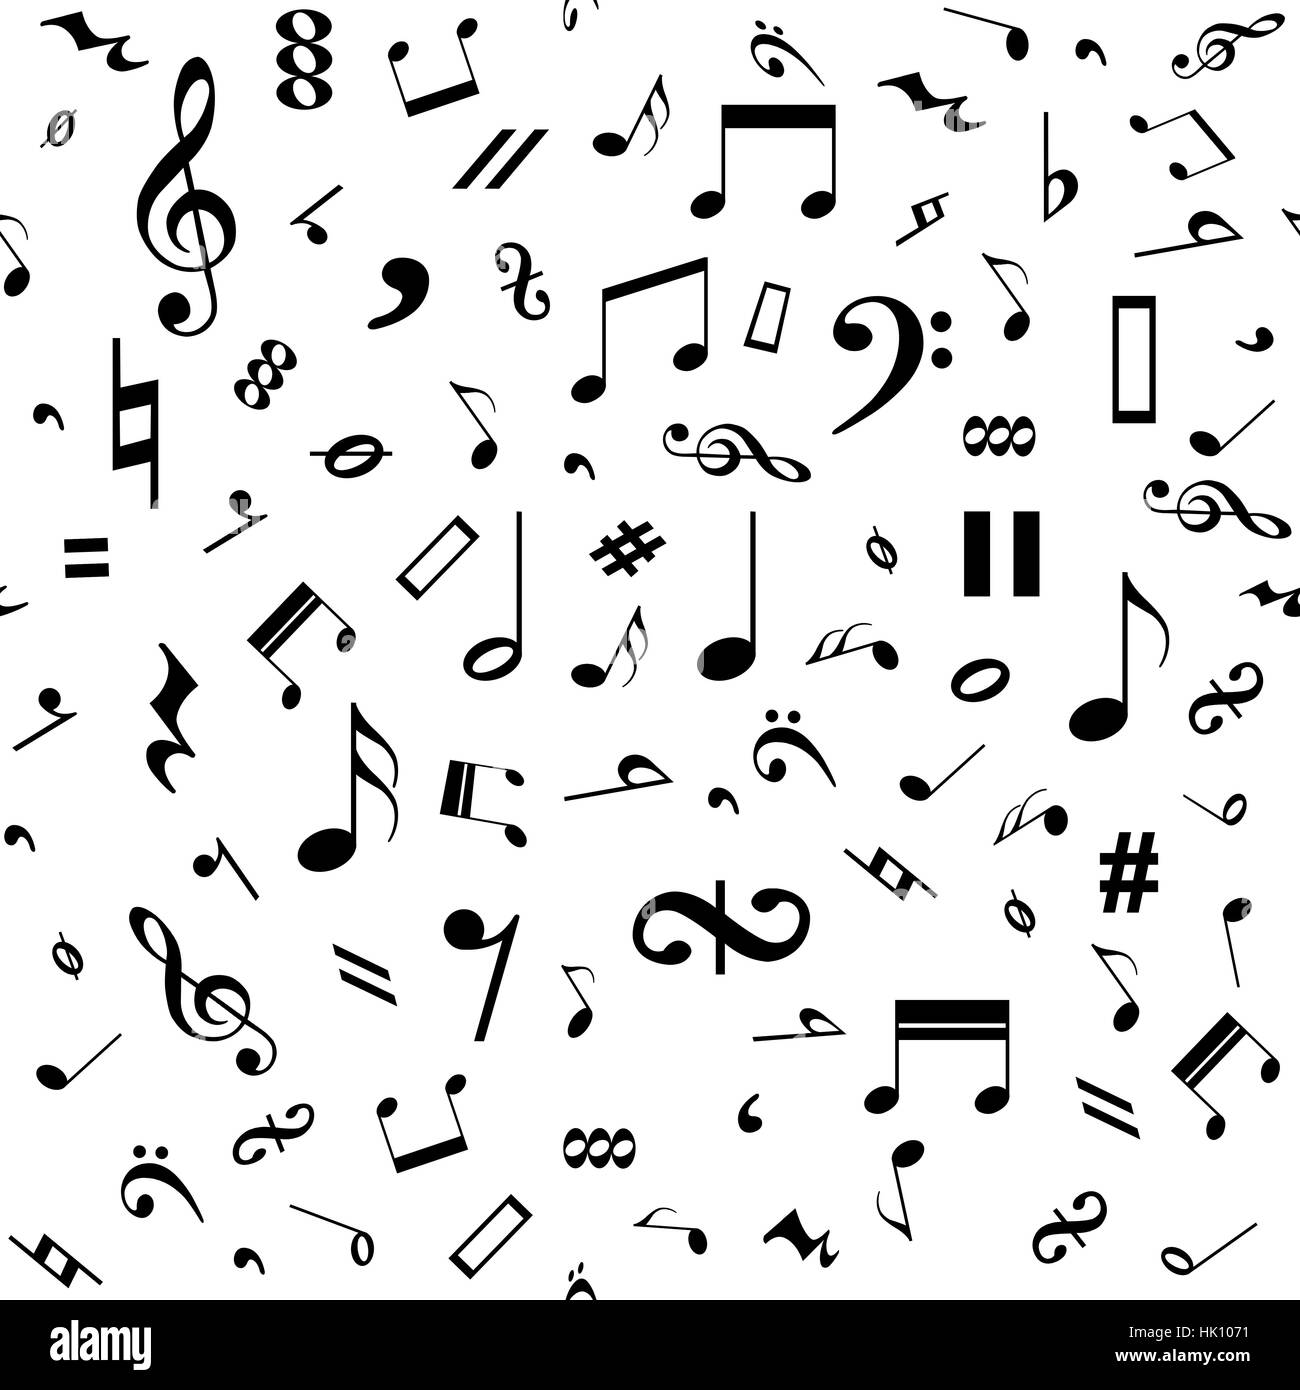 Seamless black and white music notes background Stock Photo